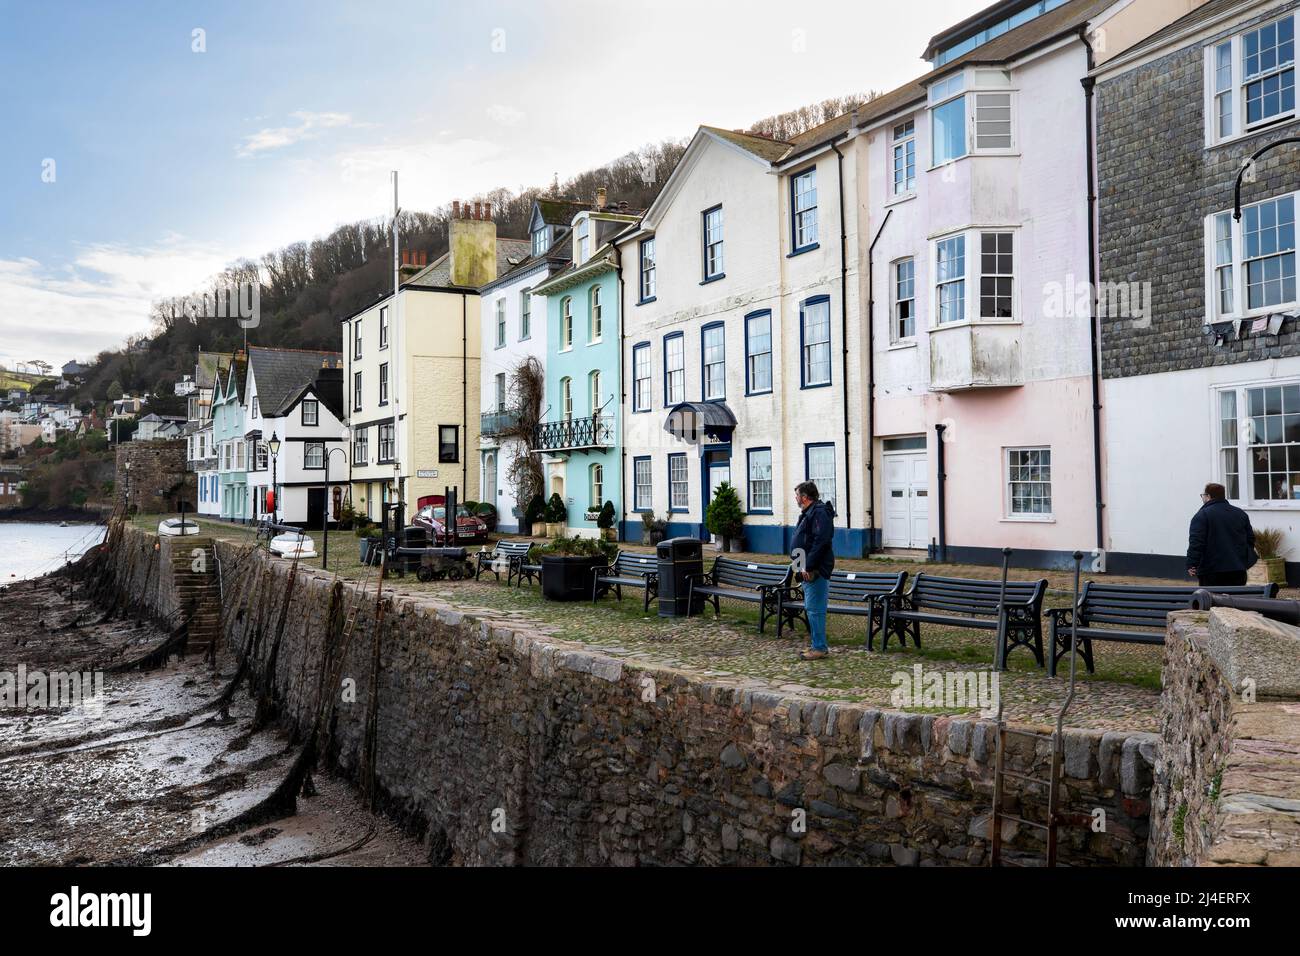 Historic houses on the quay in Dartmouth, South Hams, Devon. Bayard's Cove Fort is at the end of the quay. The quay was one of the stops the Pilgrim F Stock Photo